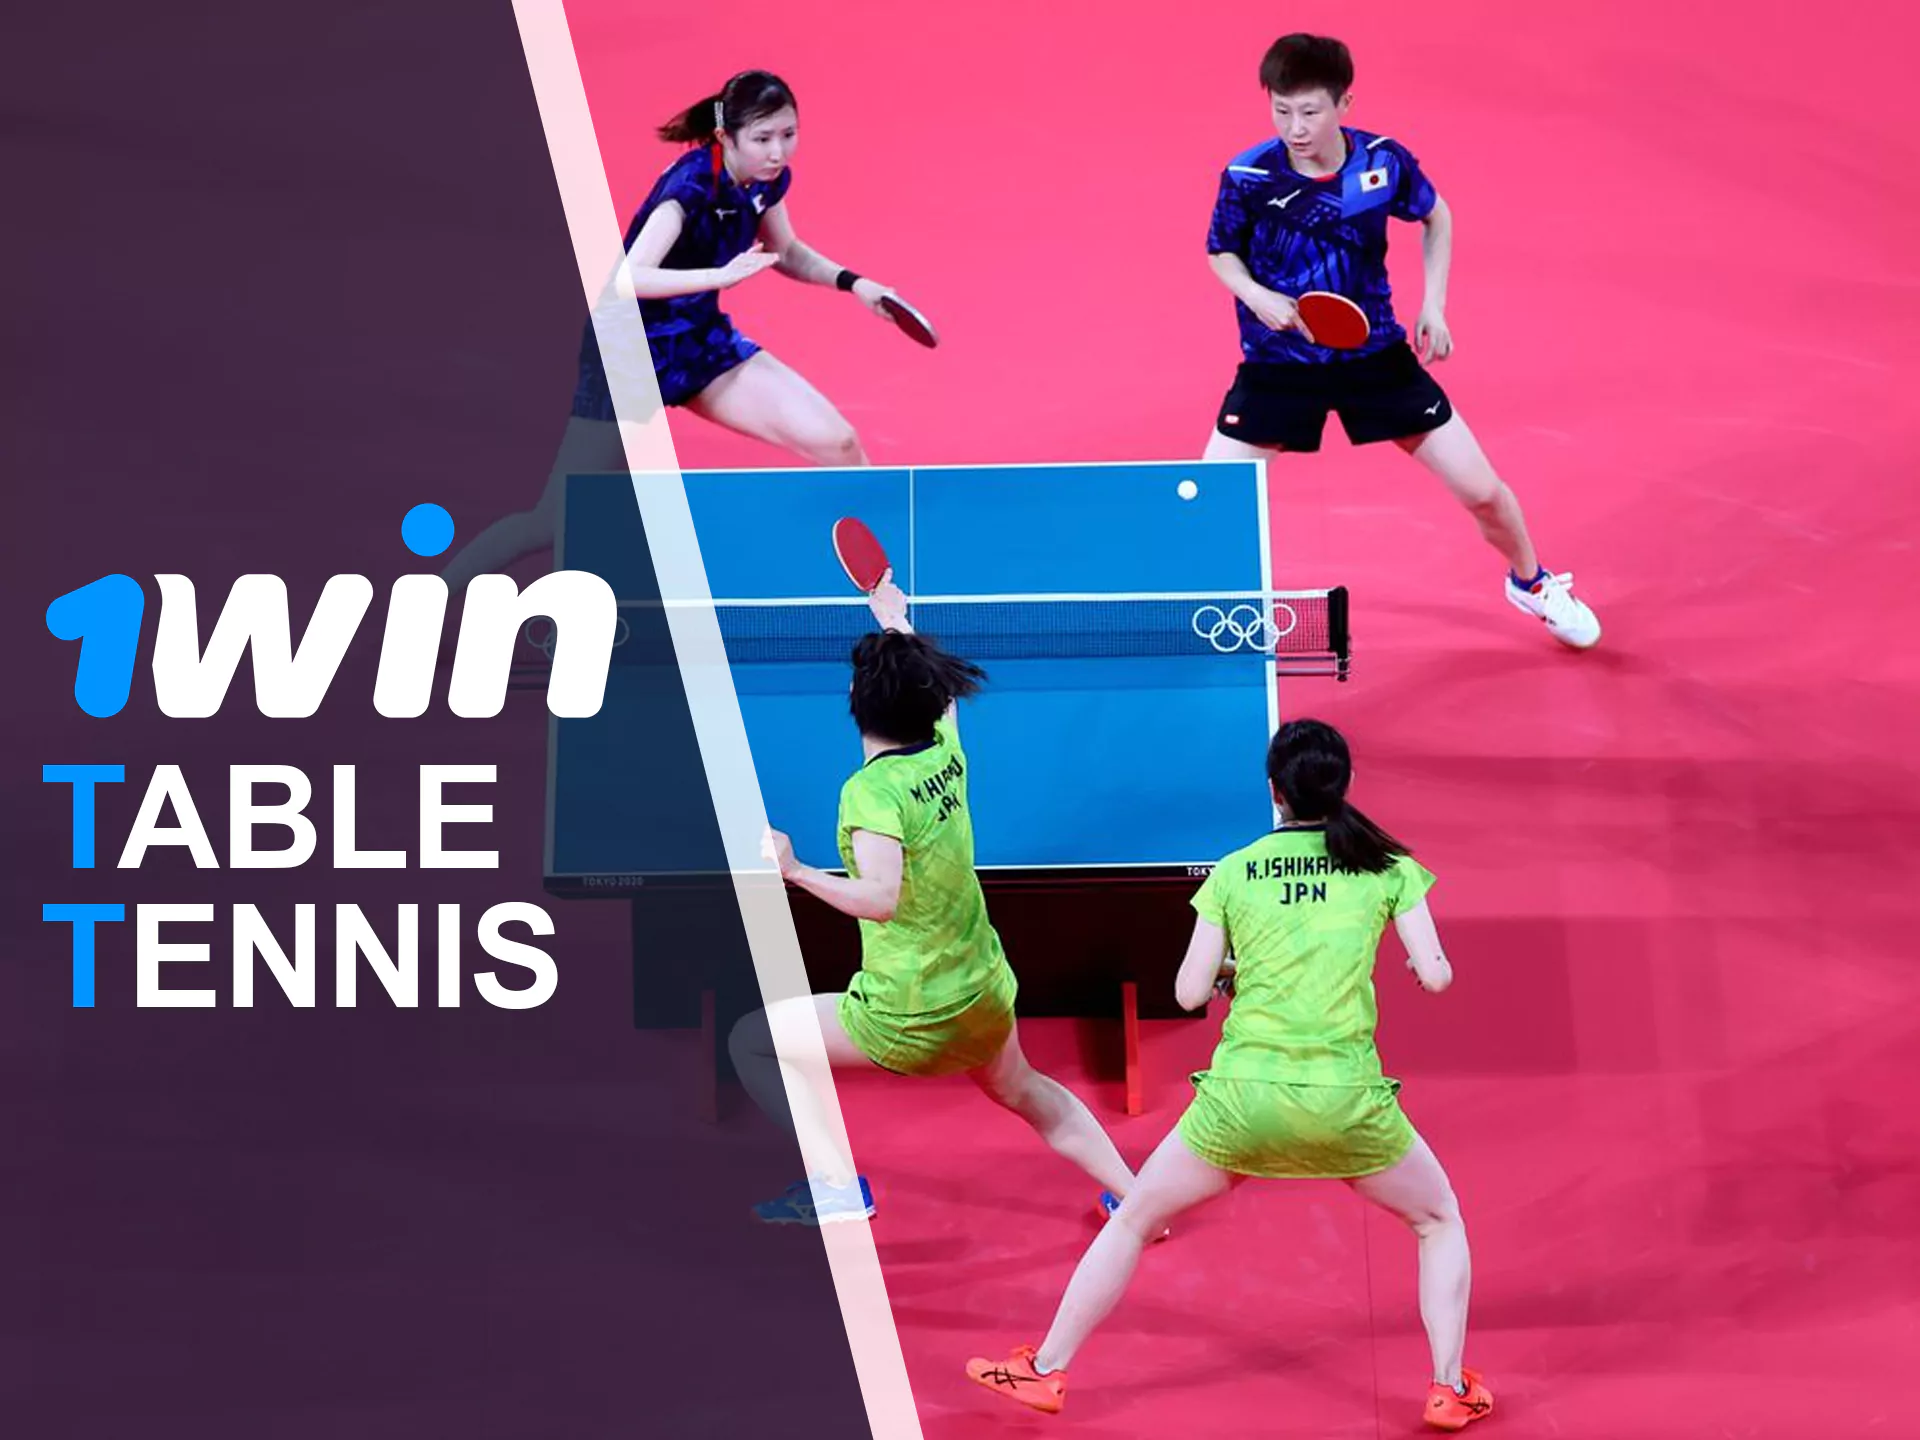 Bet on the fastest table tennis team.